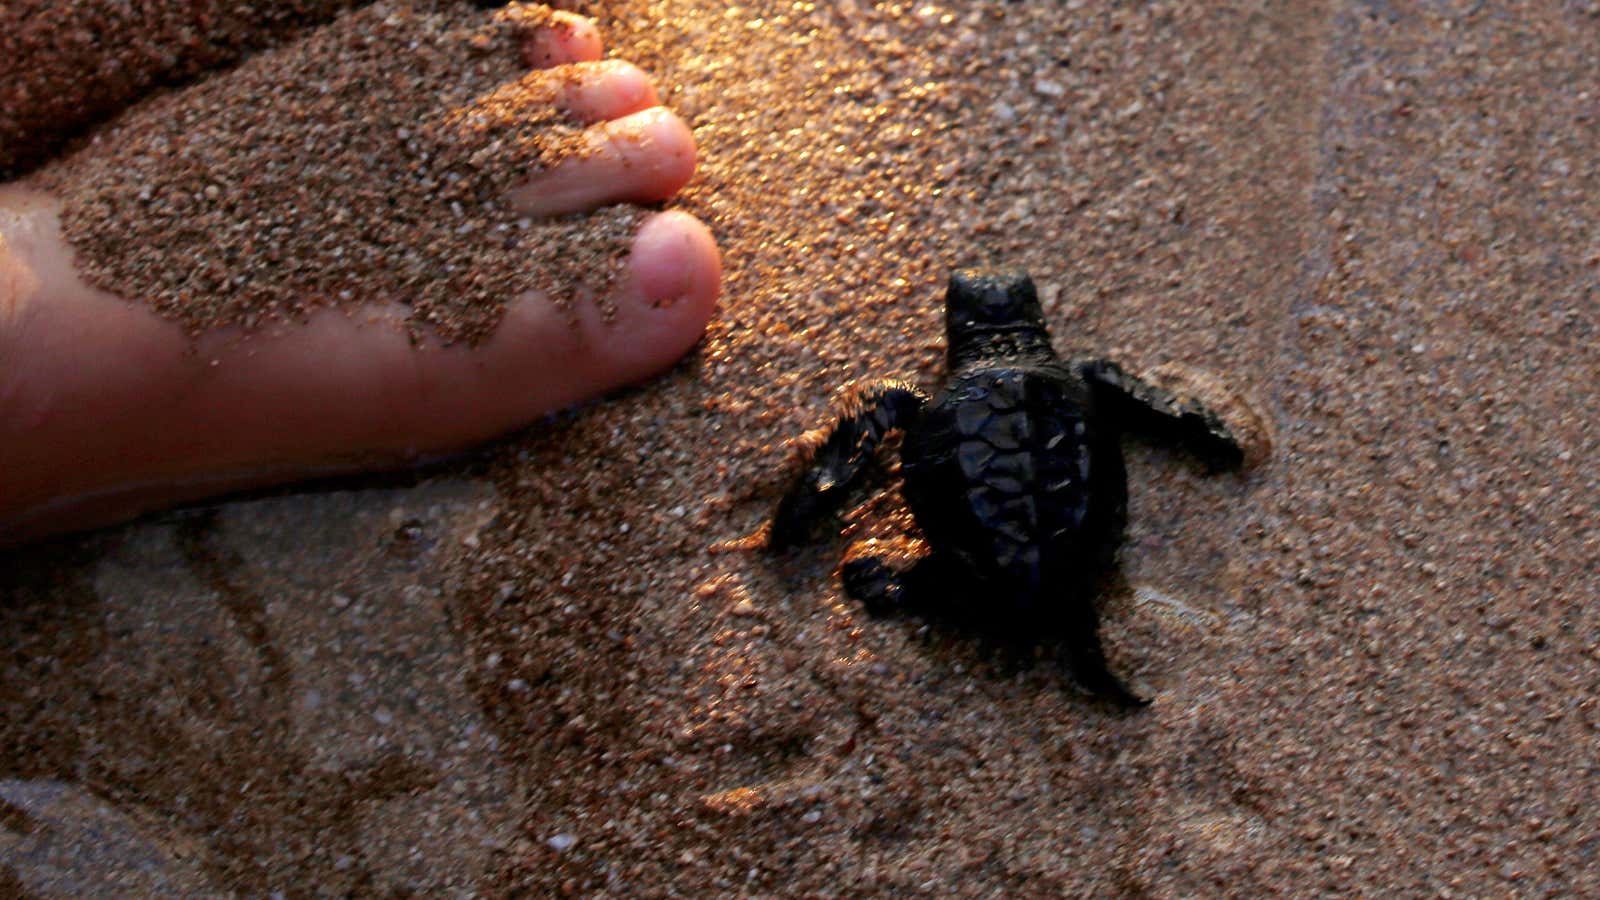 A baby sea turtle begins its long journey.